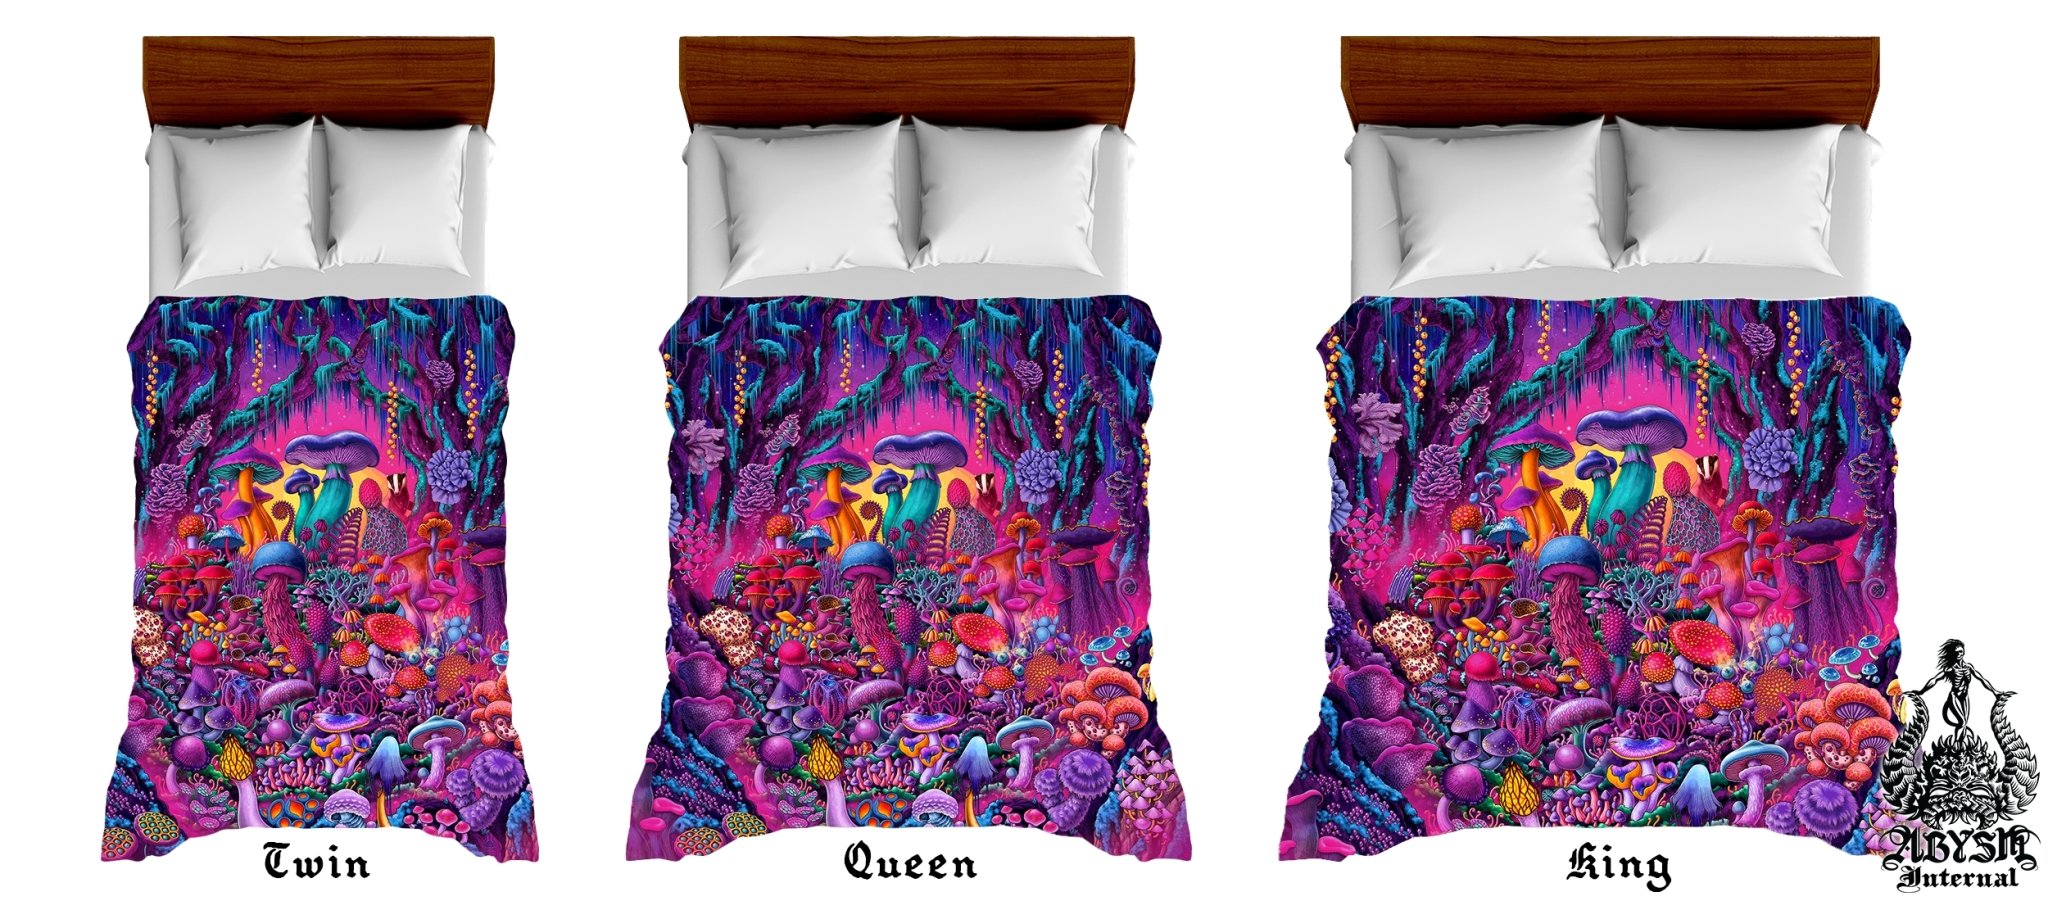 Magic Mushrooms Bedding Set, Comforter and Duvet, Psychedelic Vaporwave Bed Cover and Retrowave Bedroom Decor, King, Queen and Twin Size, Gamer 80s Room - Synthwave - Abysm Internal